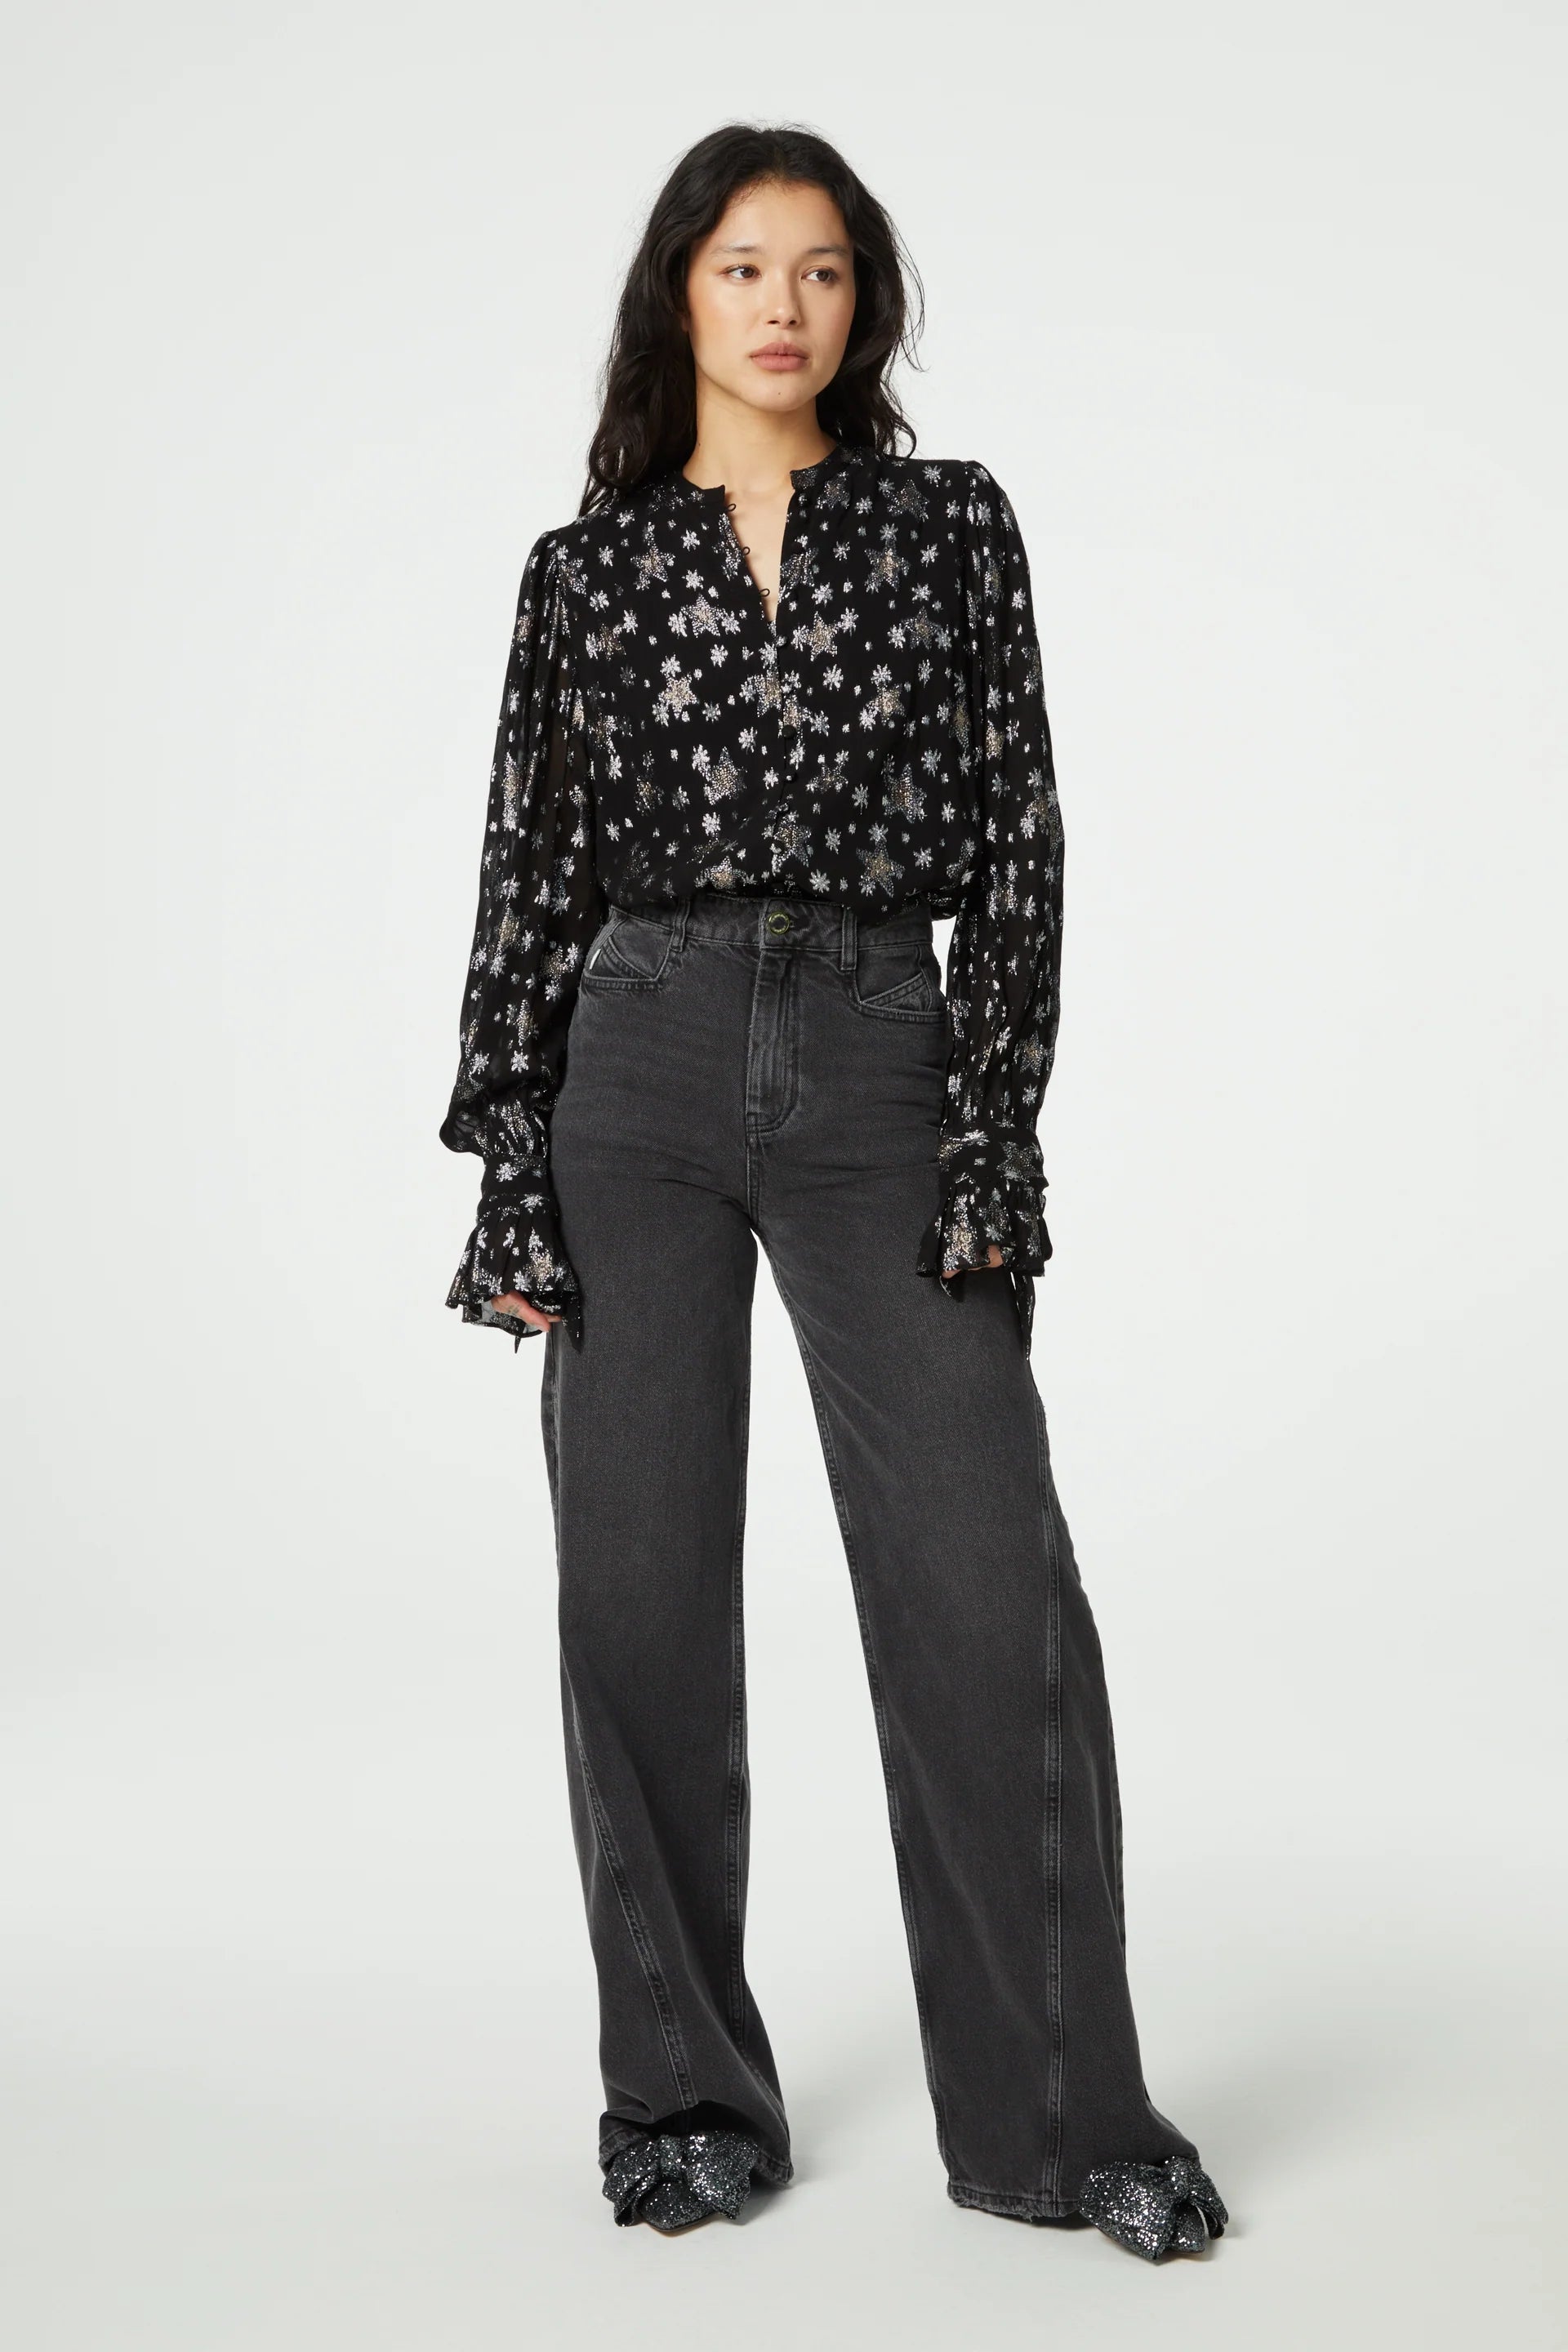 The model is wearing a Kylie Blouse - Starfleet by Fabienne Chapot, with long sleeves and a fabric-covered button closure, paired with wide leg jeans.